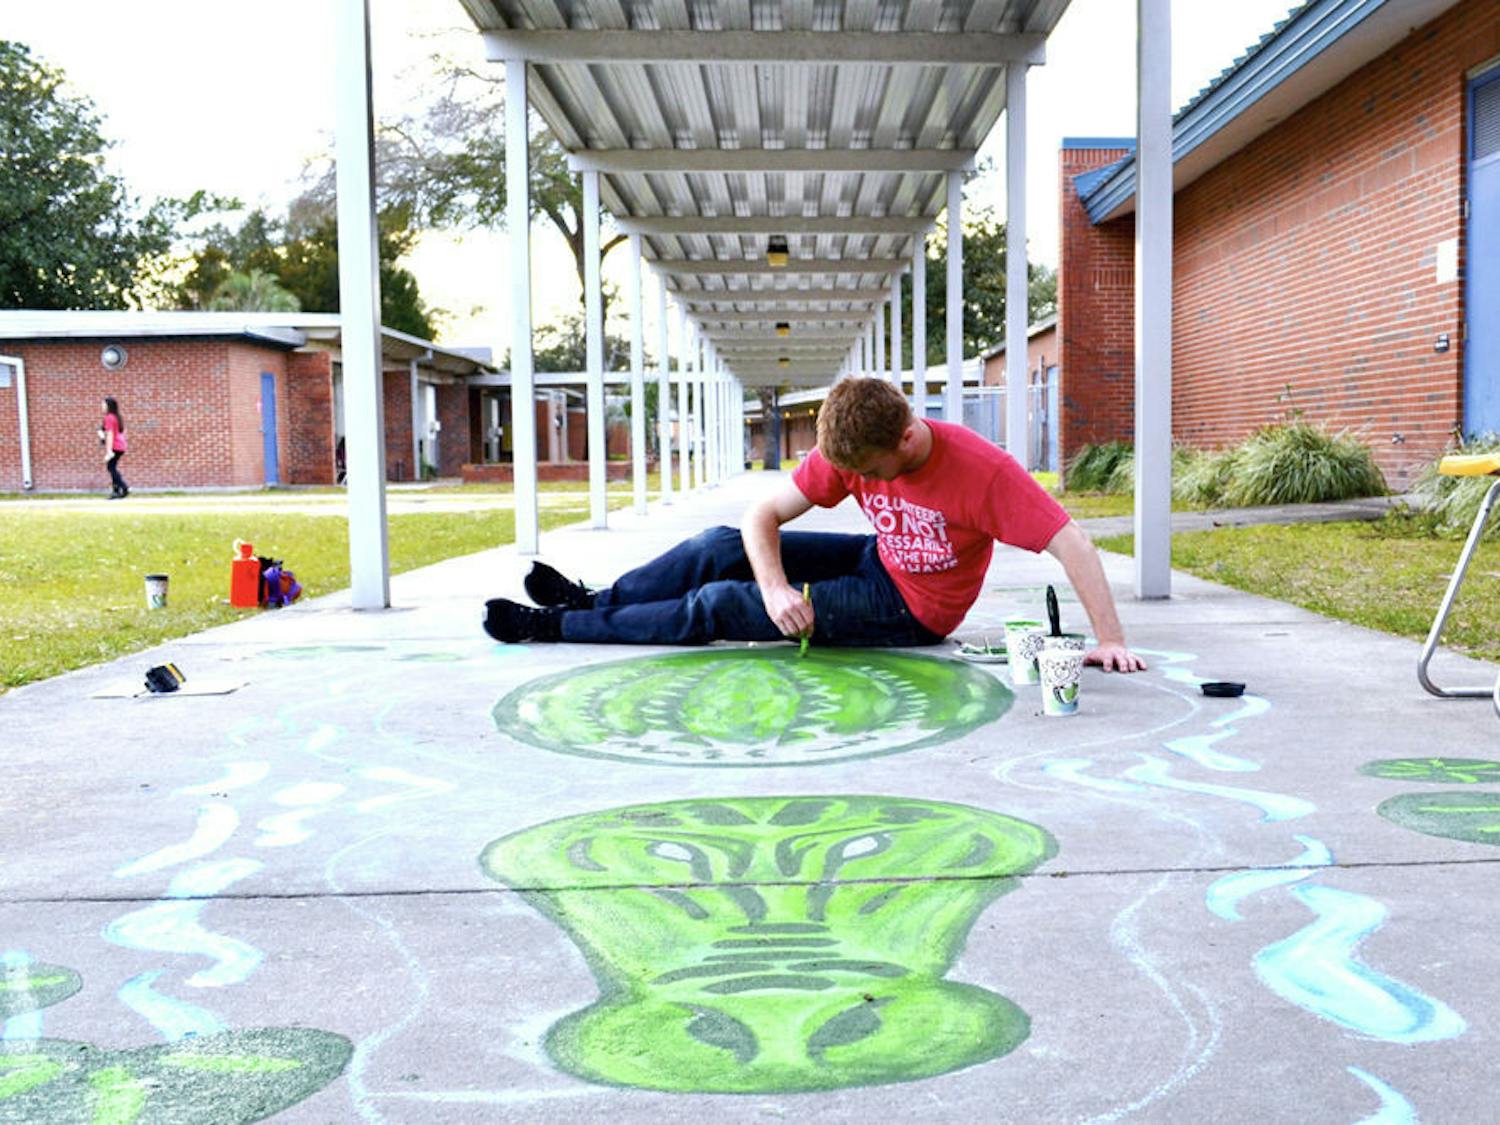 Brandon Peebles, 21, an art coordinator for Project Makeover, paints an alligator on the sidewalk at W.A. Metcalfe Elementary School. Members and volunteers painted murals all around the school, including musical instruments in the music room, a Dr. Seuss themed kindergarten area and an ocean scene in the cafeteria.